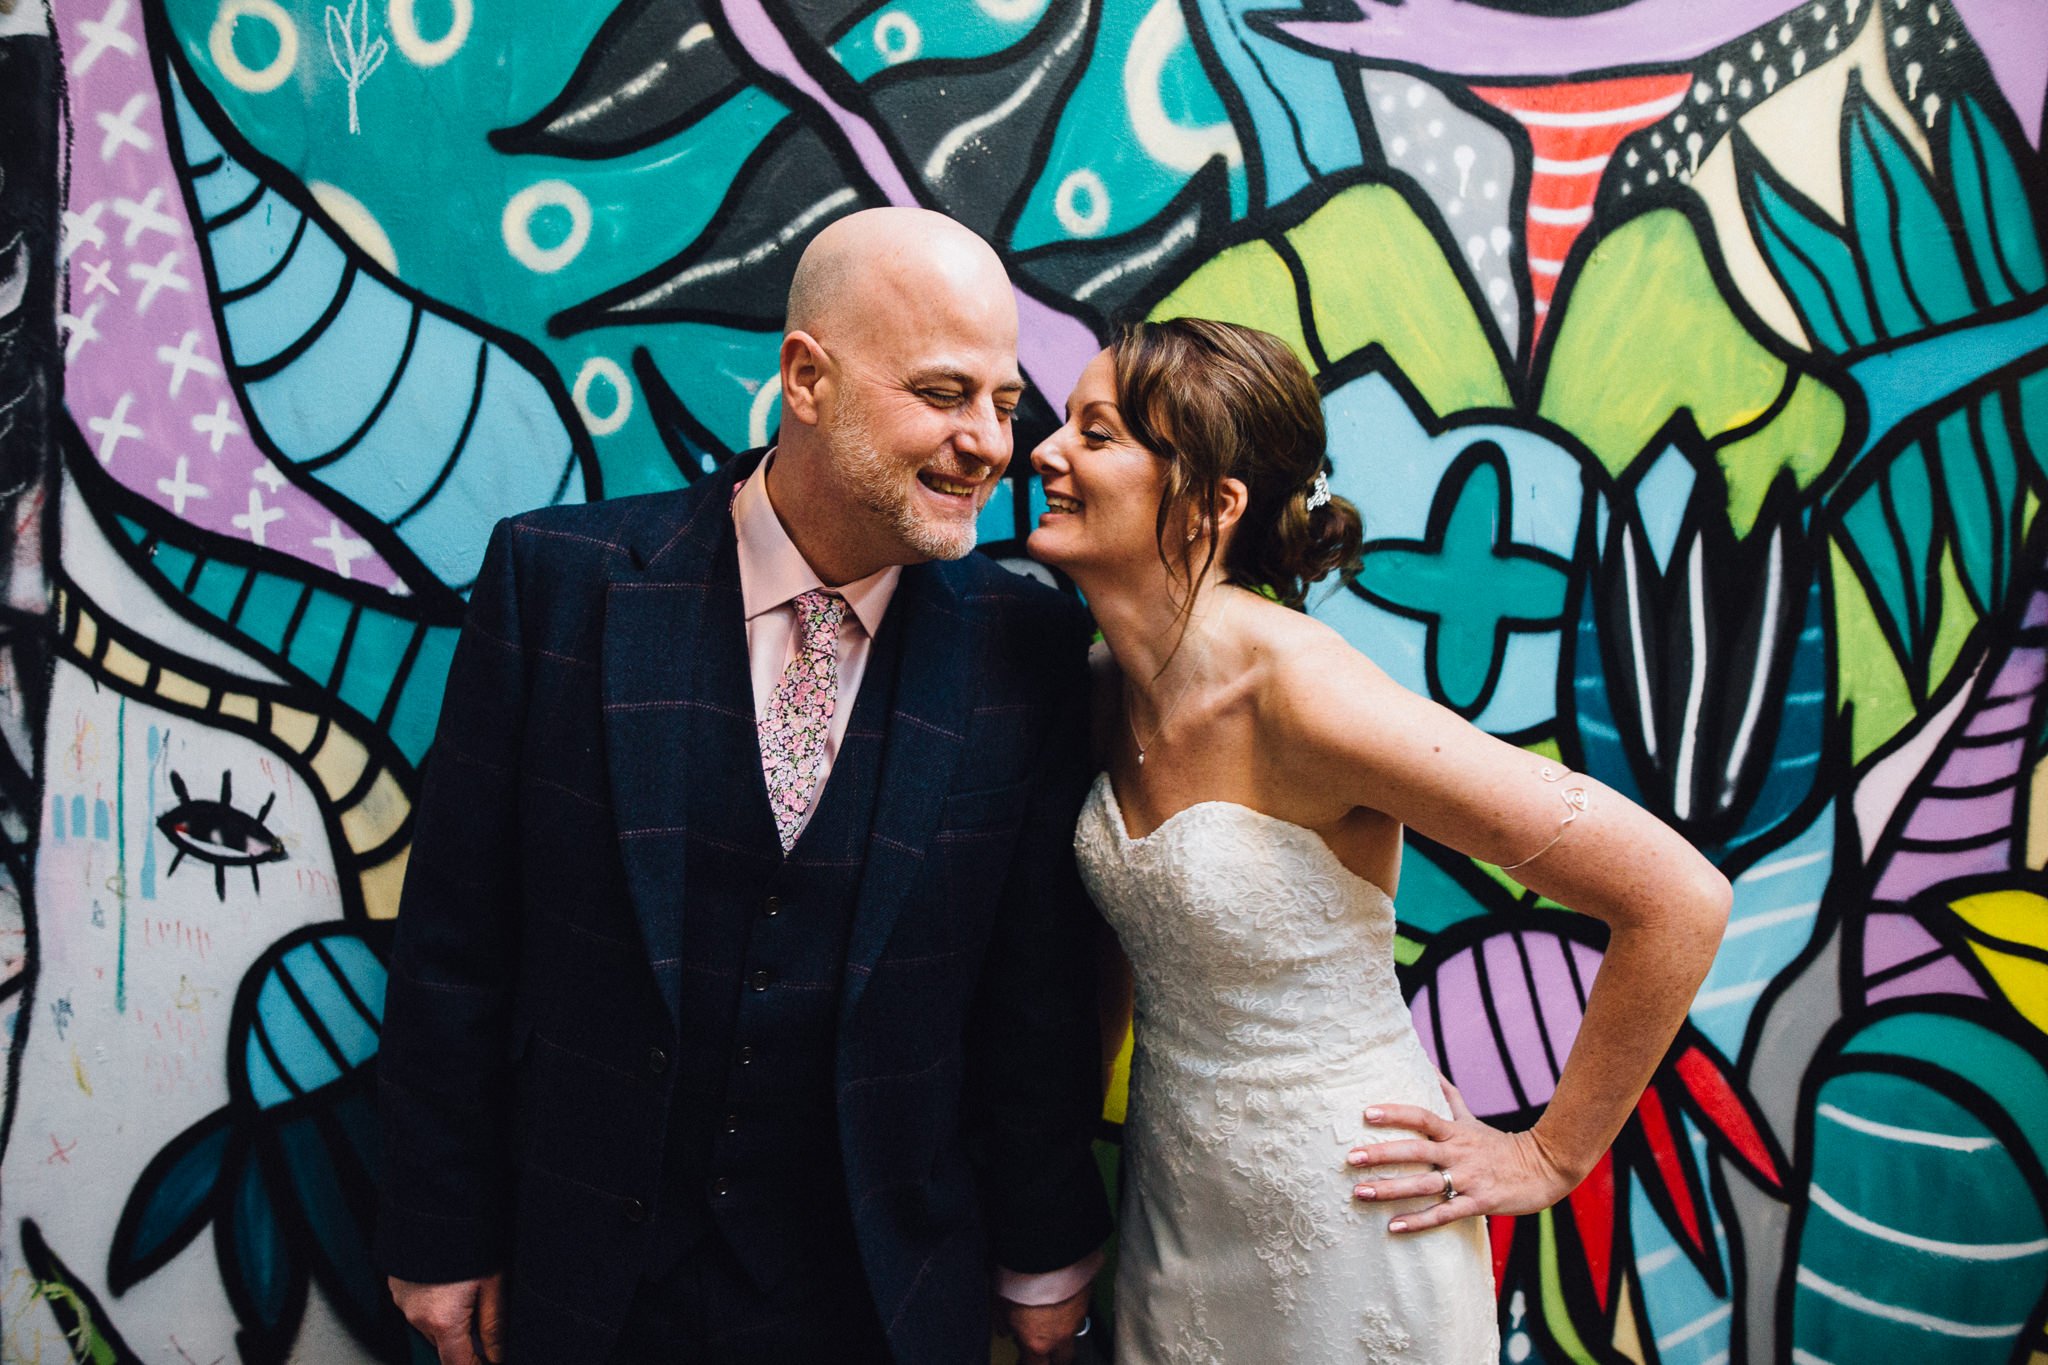  Bride and Groom smiling in front of a wall with graffiti  